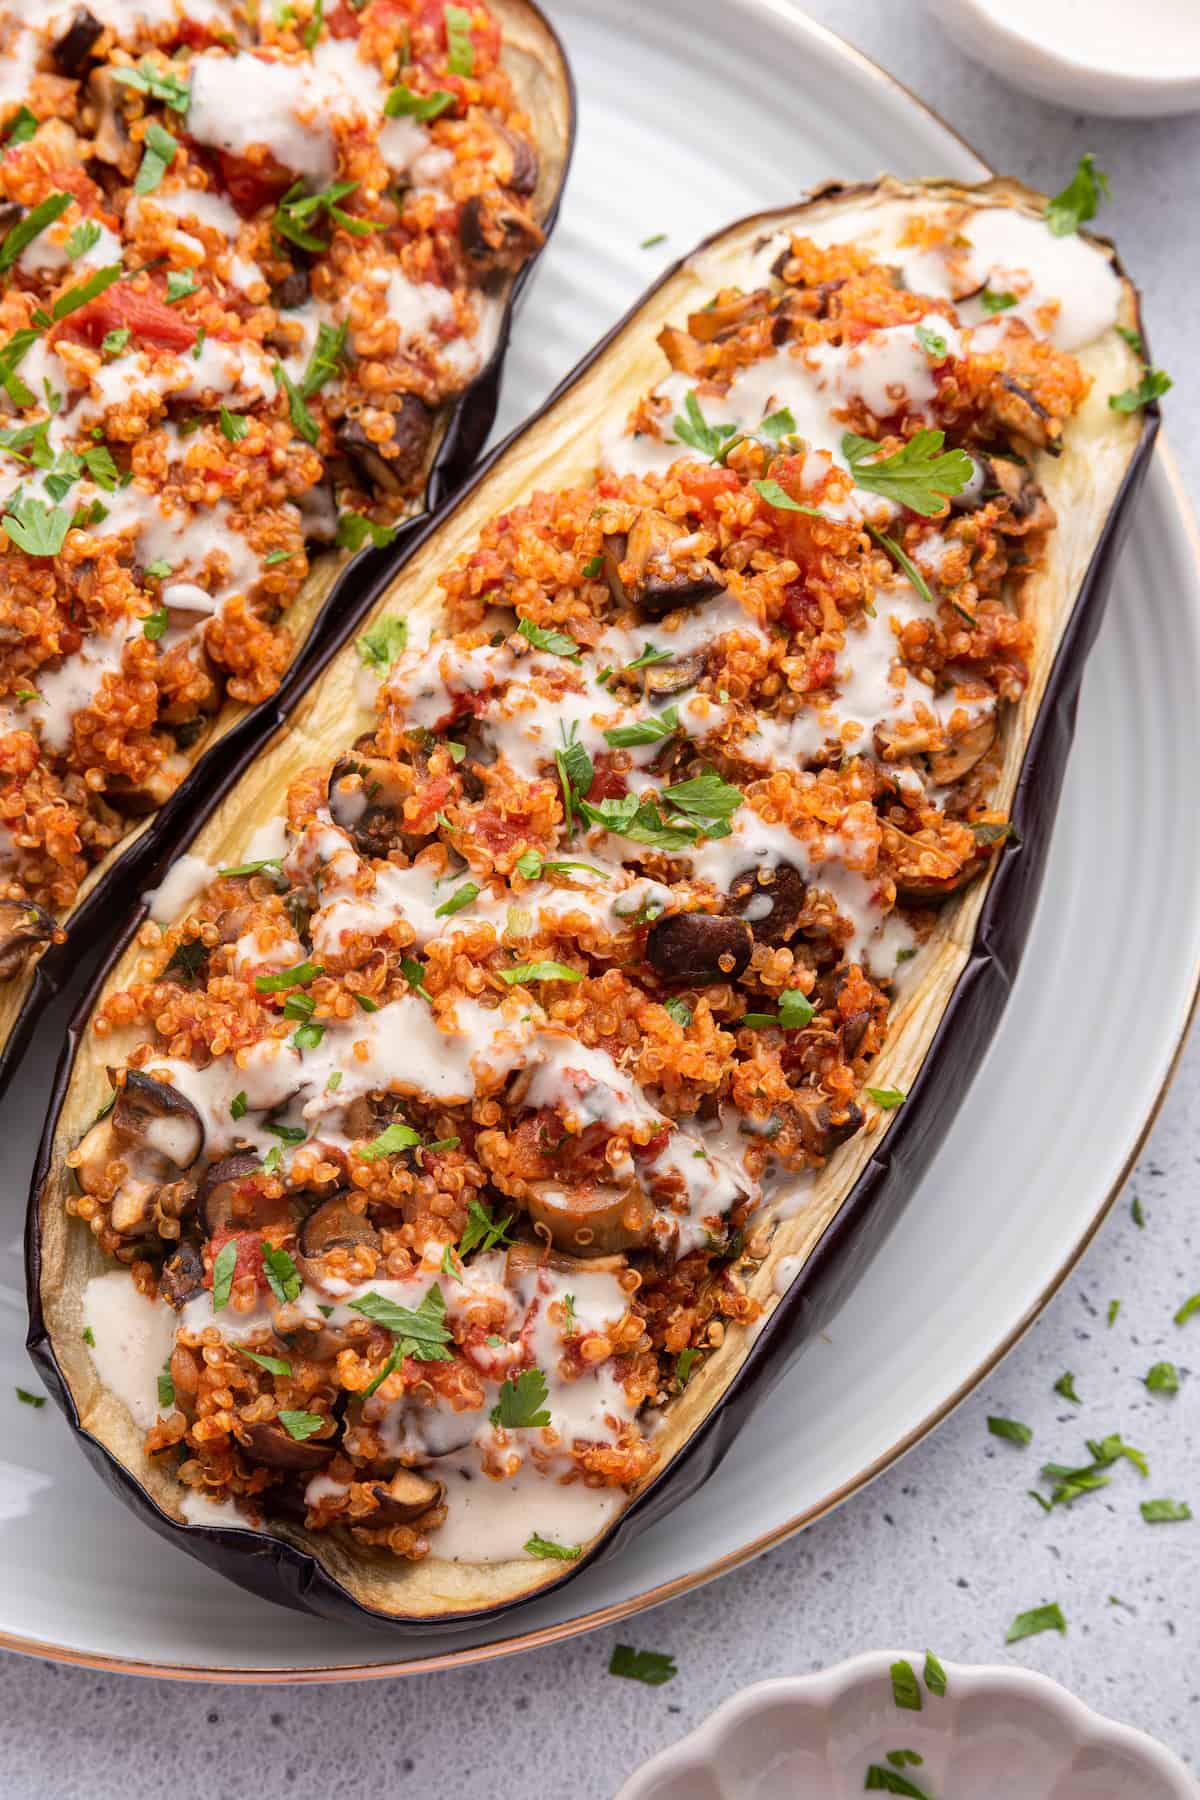 Eggplant stuffed with quinoa and vegetables on plate